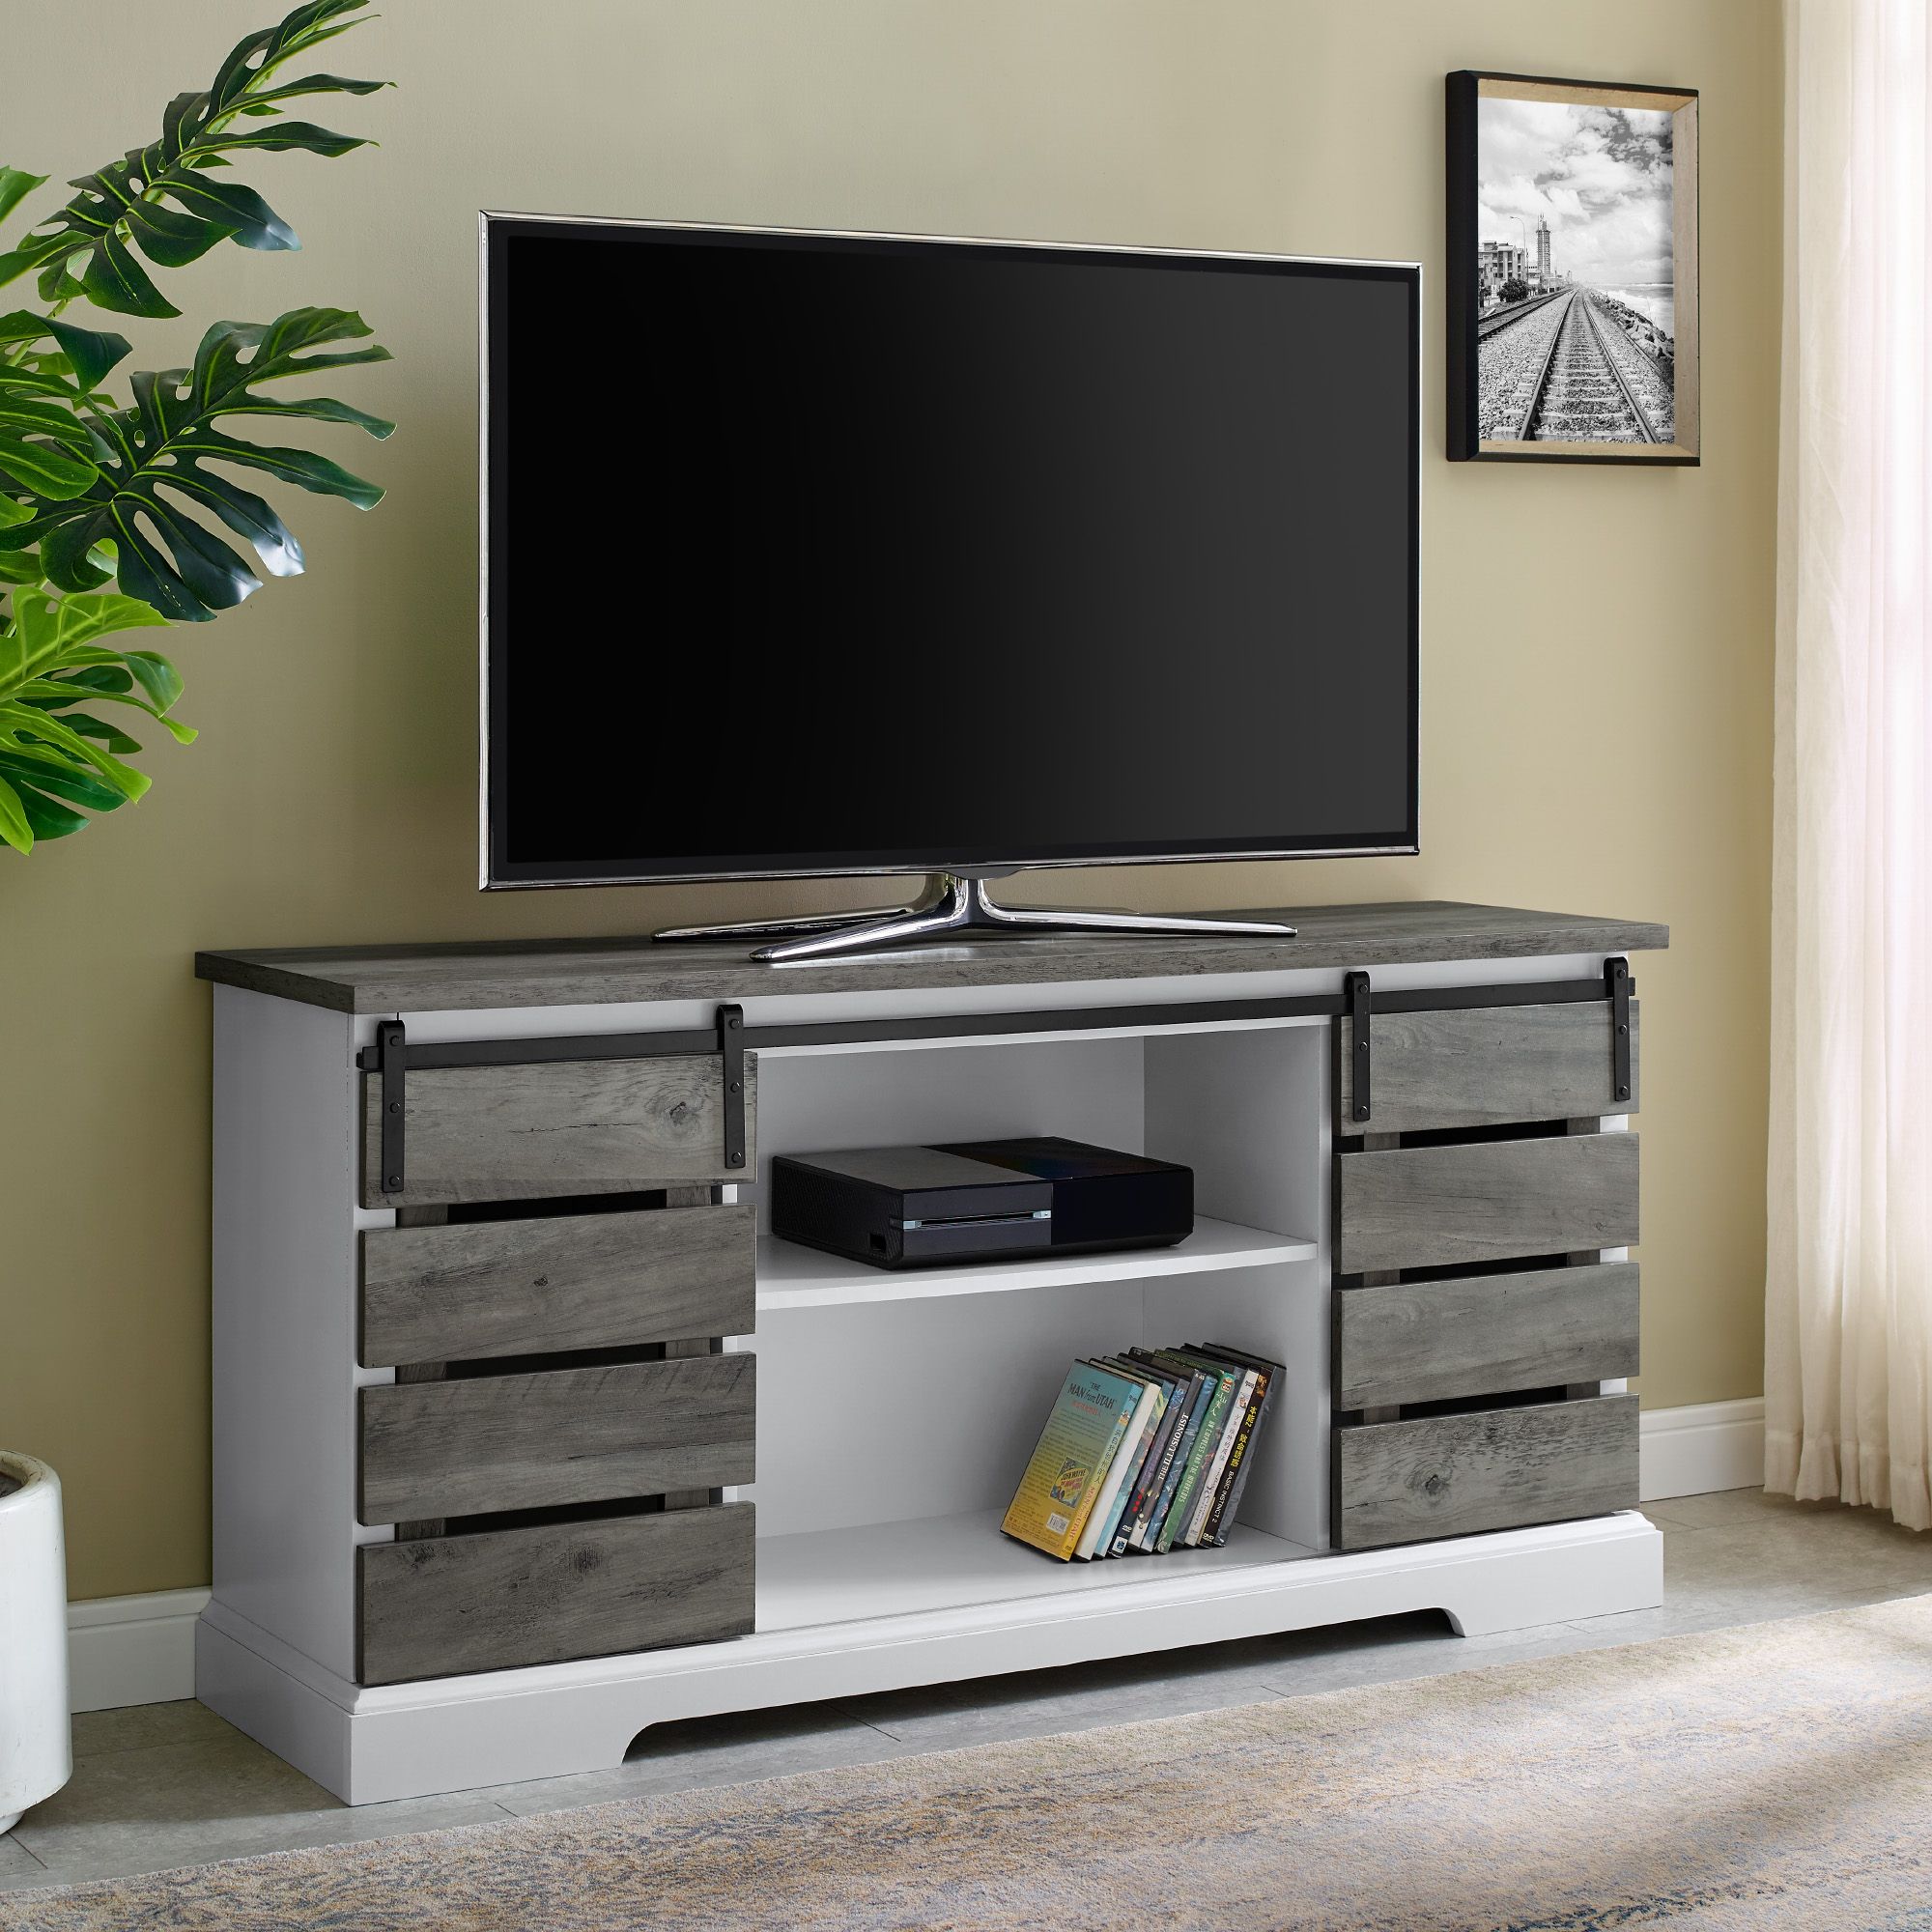 Woven Paths Farmhouse Sliding Slat Door Tv Stand For Tvs Pertaining To Woven Paths Barn Door Tv Stands In Multiple Finishes (View 2 of 15)